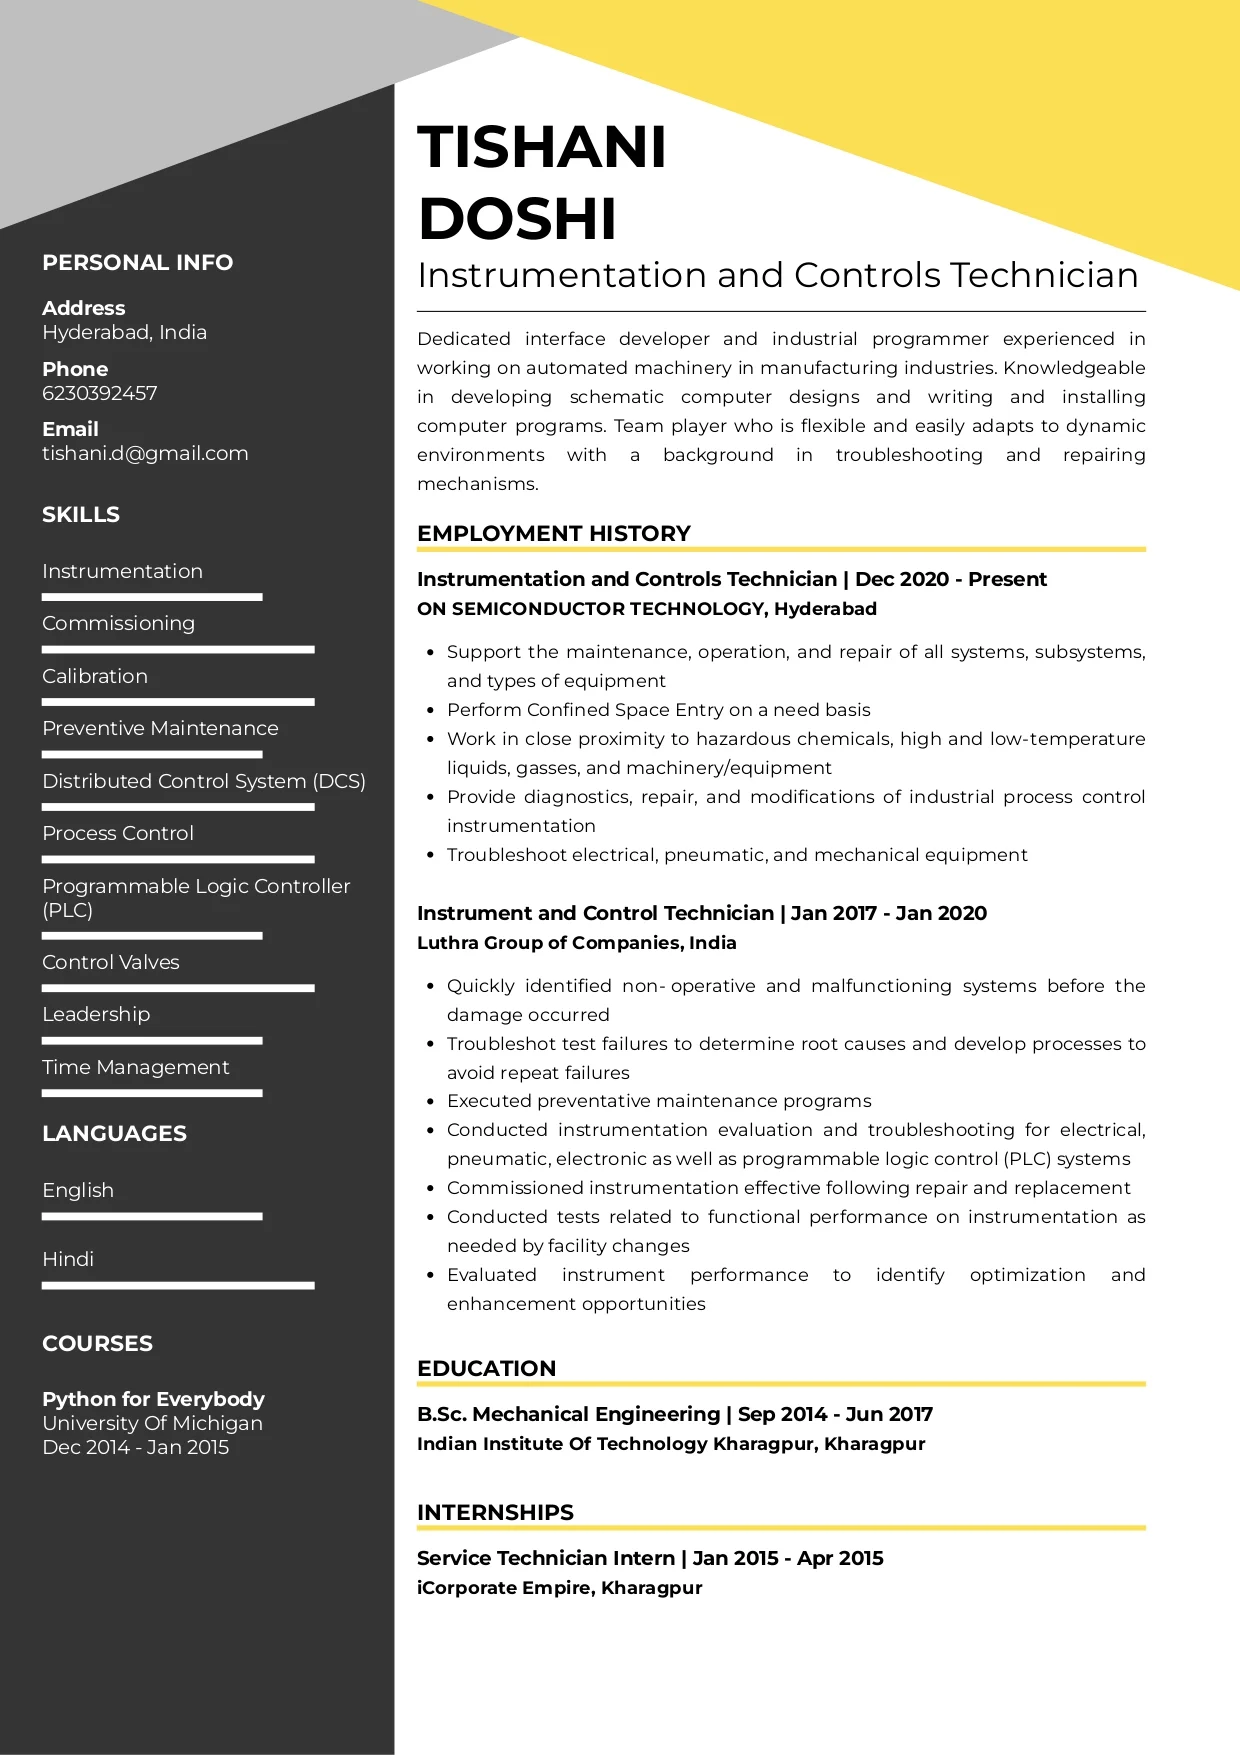 Sample Resume of Instrumentation and Controls Technician | Free Resume Templates & Samples on Resumod.co